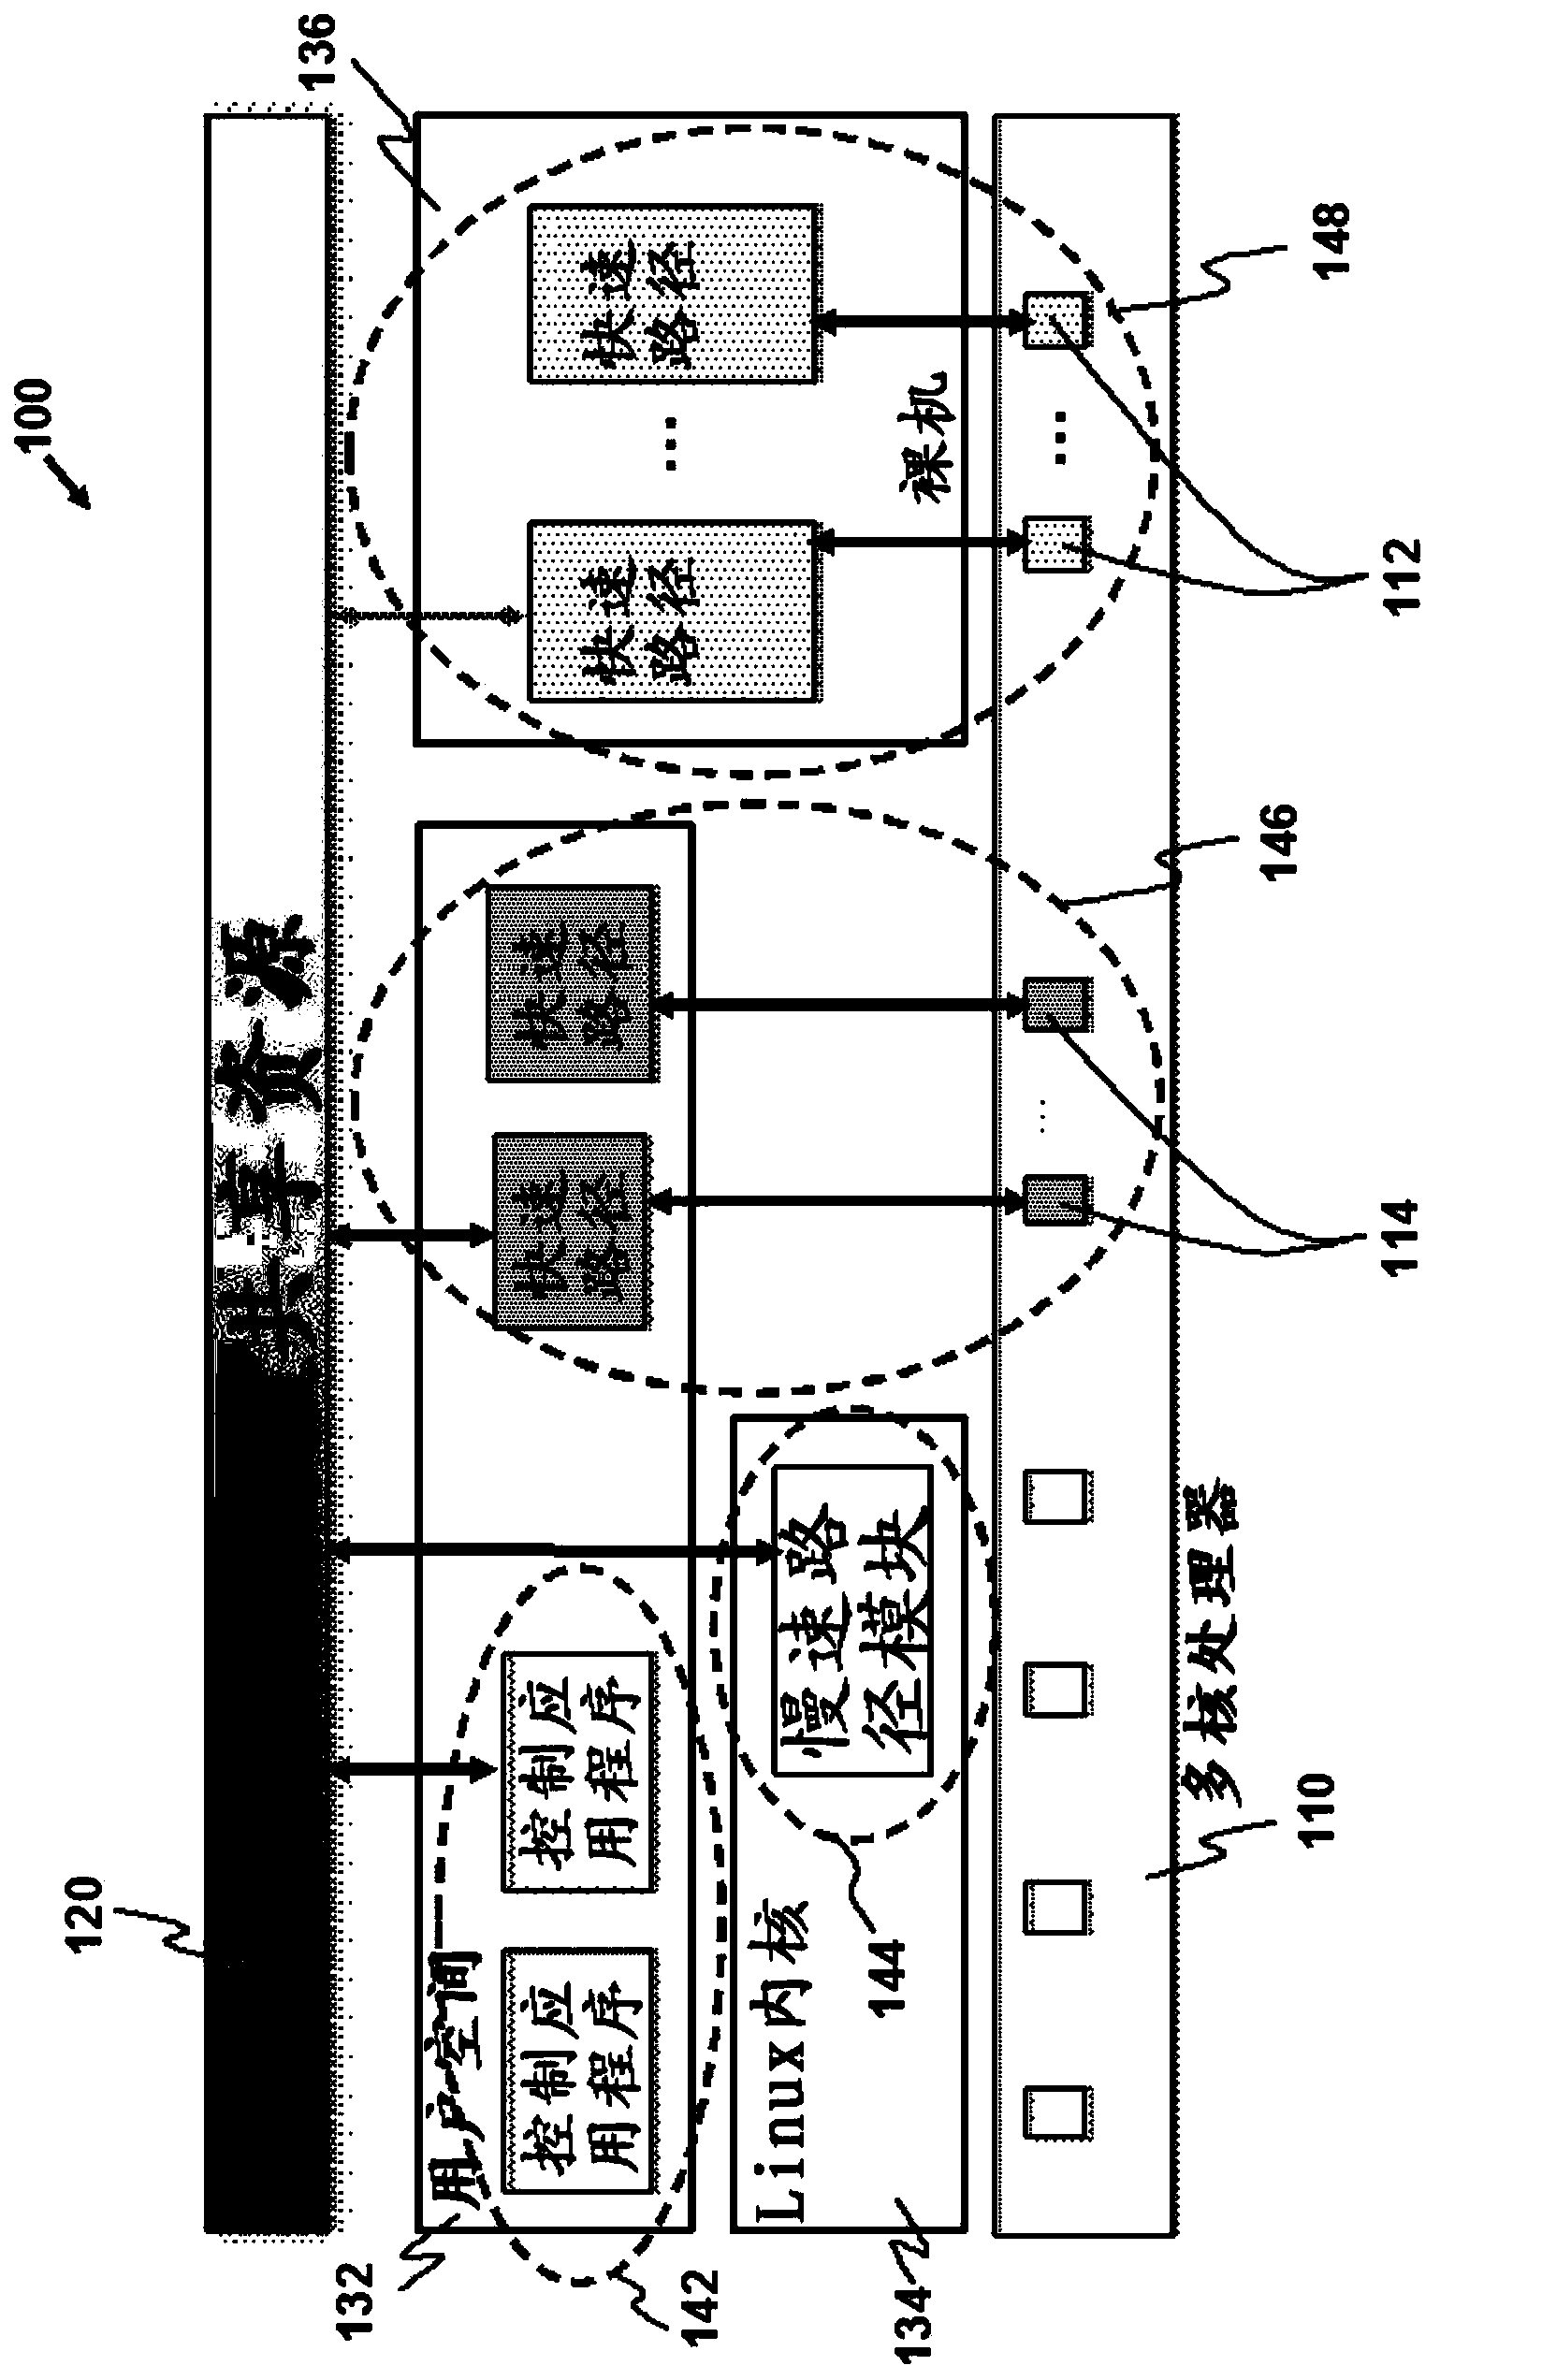 Computing system and method of operating lock in same